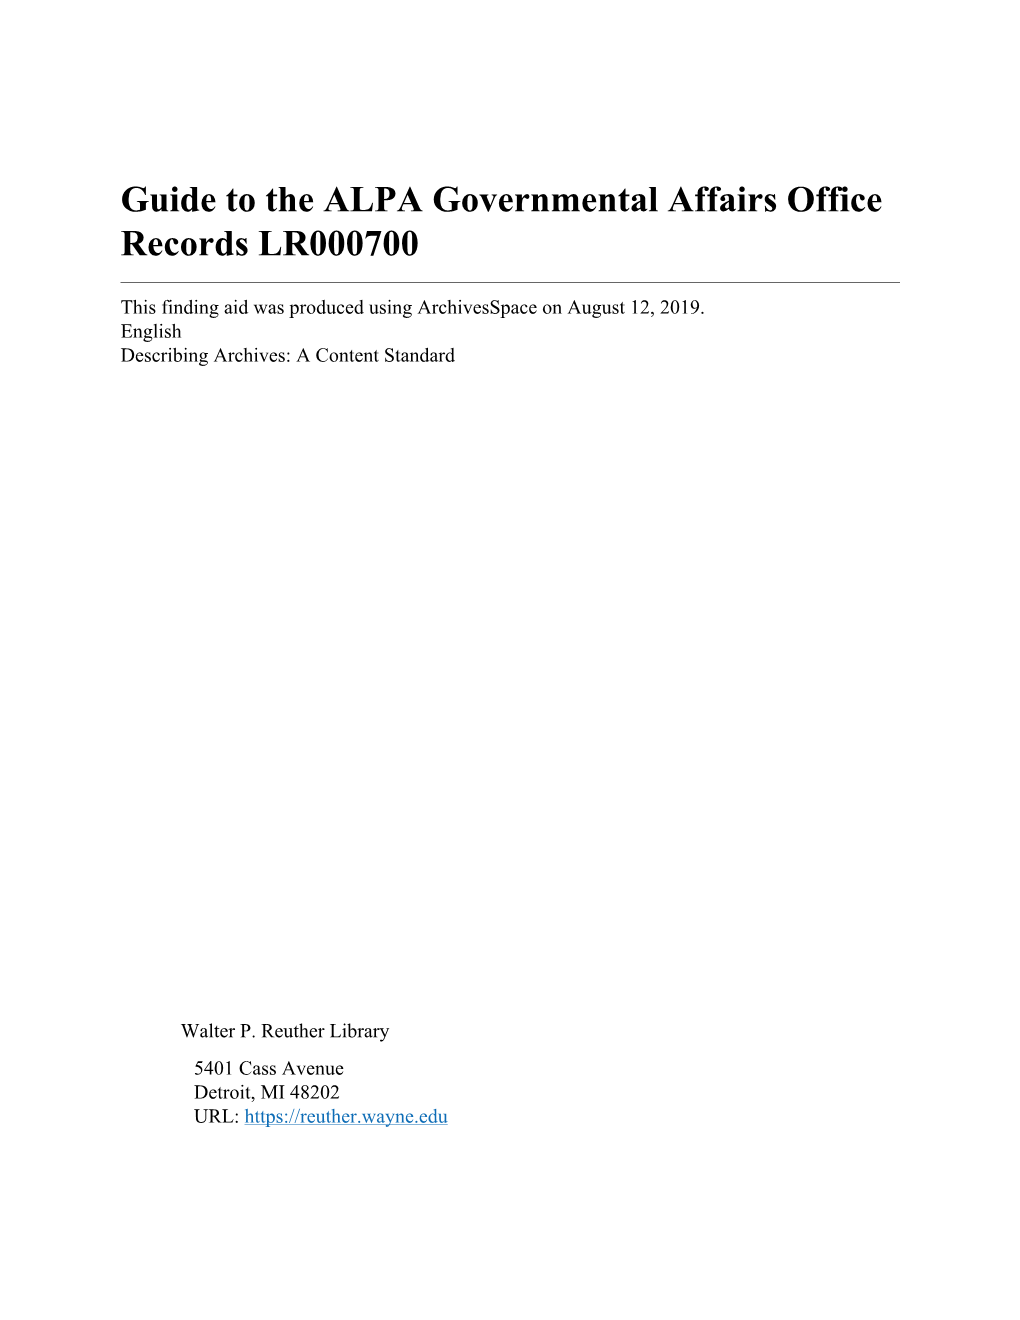 Guide to the ALPA Governmental Affairs Office Records LR000700